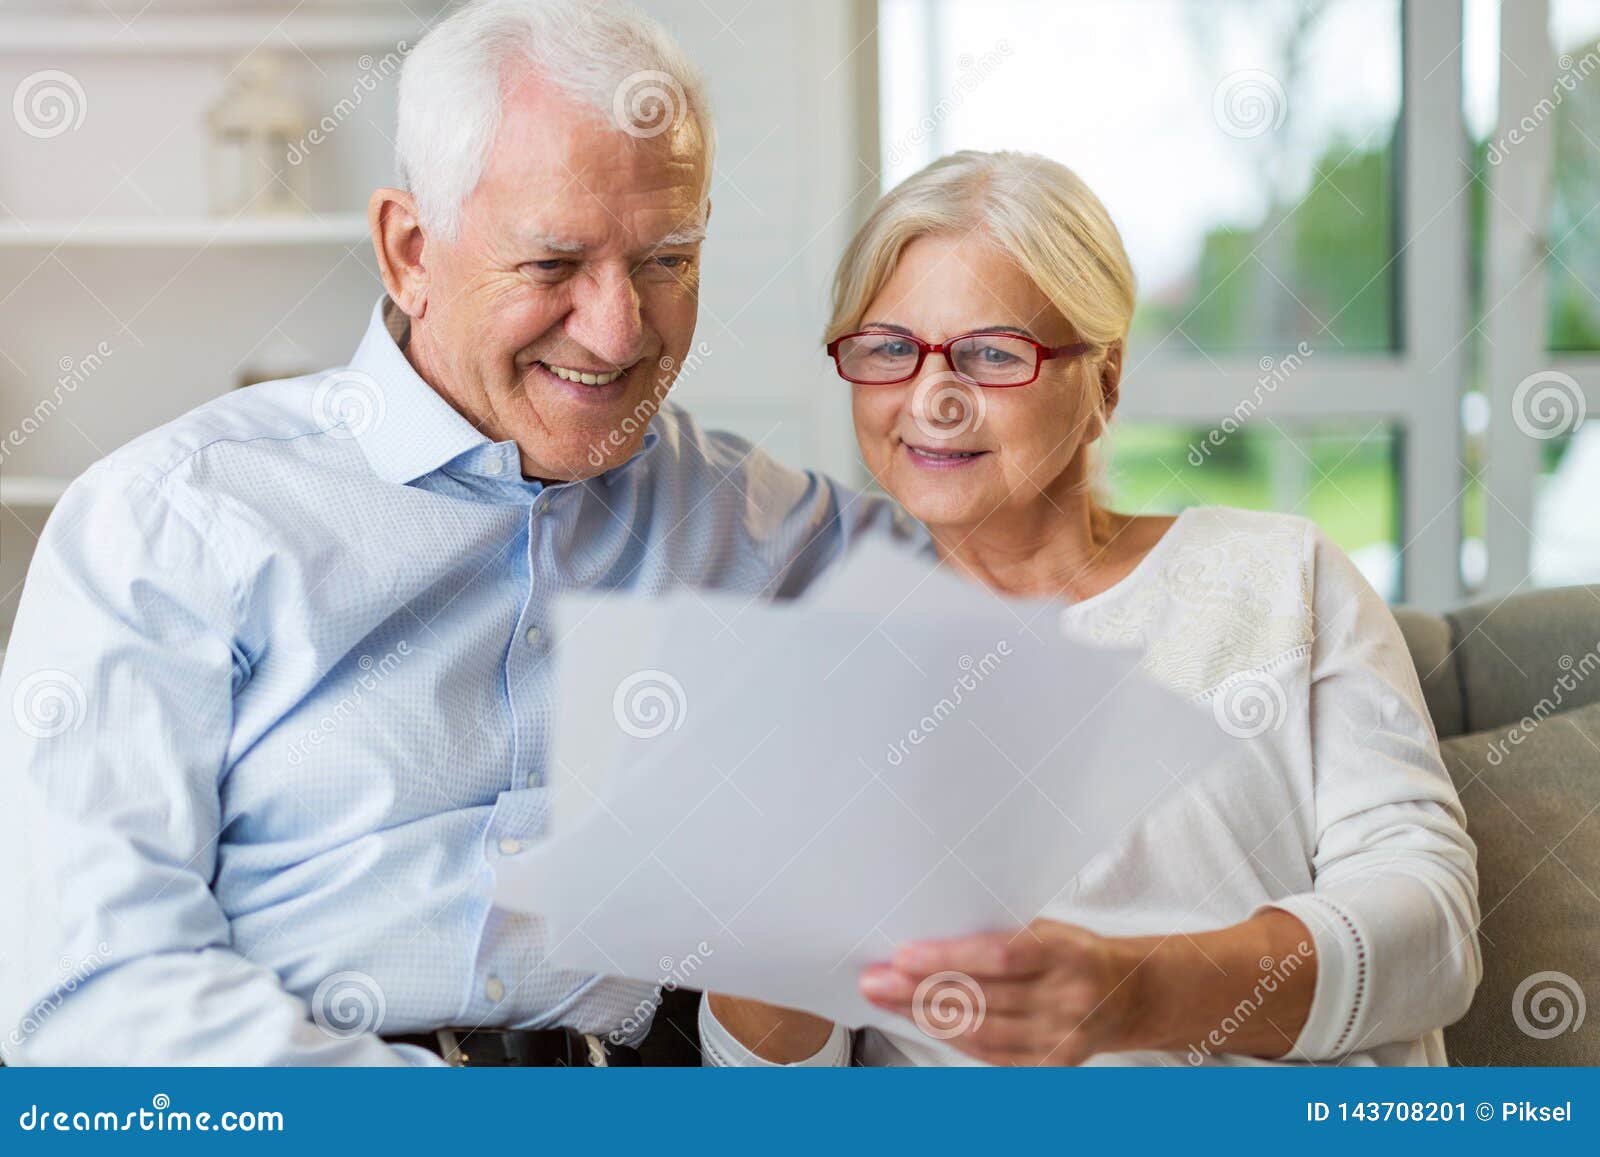 older couple reading papers together on sofa